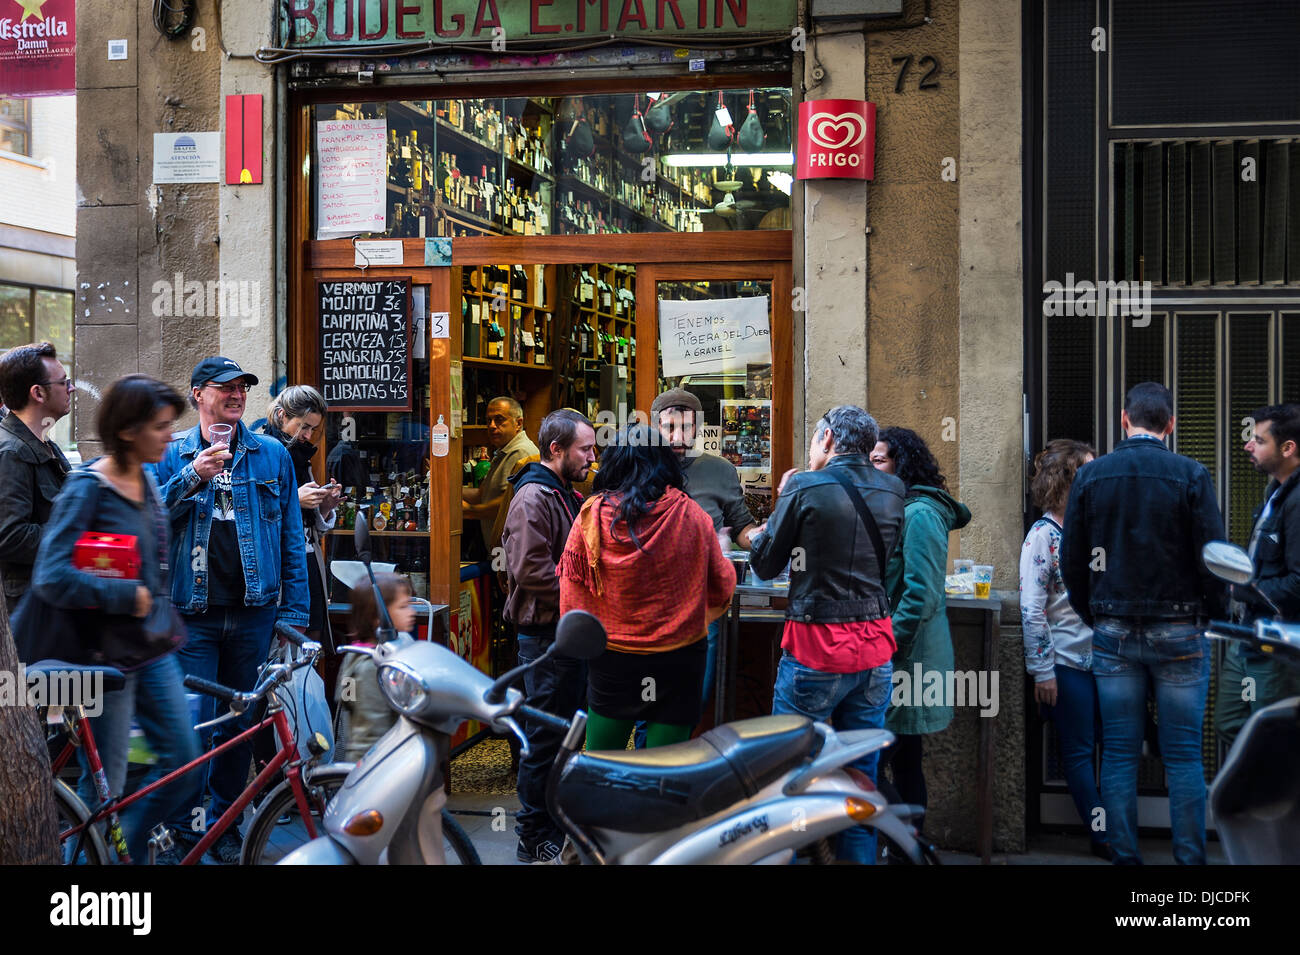 Bodega patrons spill out into the street to socialize and consume wine and beer, Barcelona, Spain Stock Photo